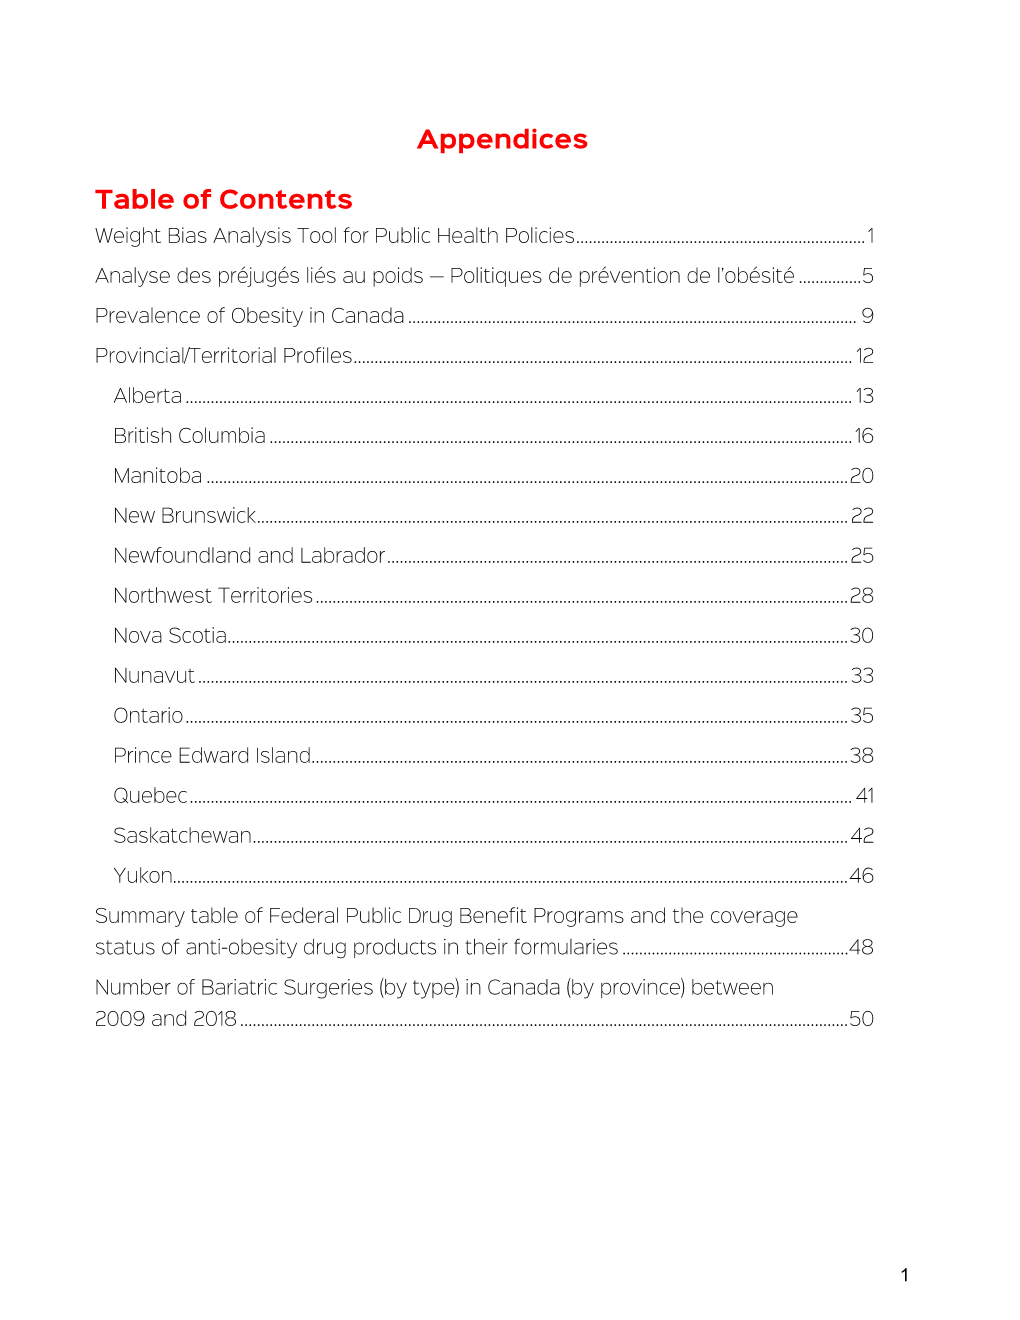 Appendices Table of Contents